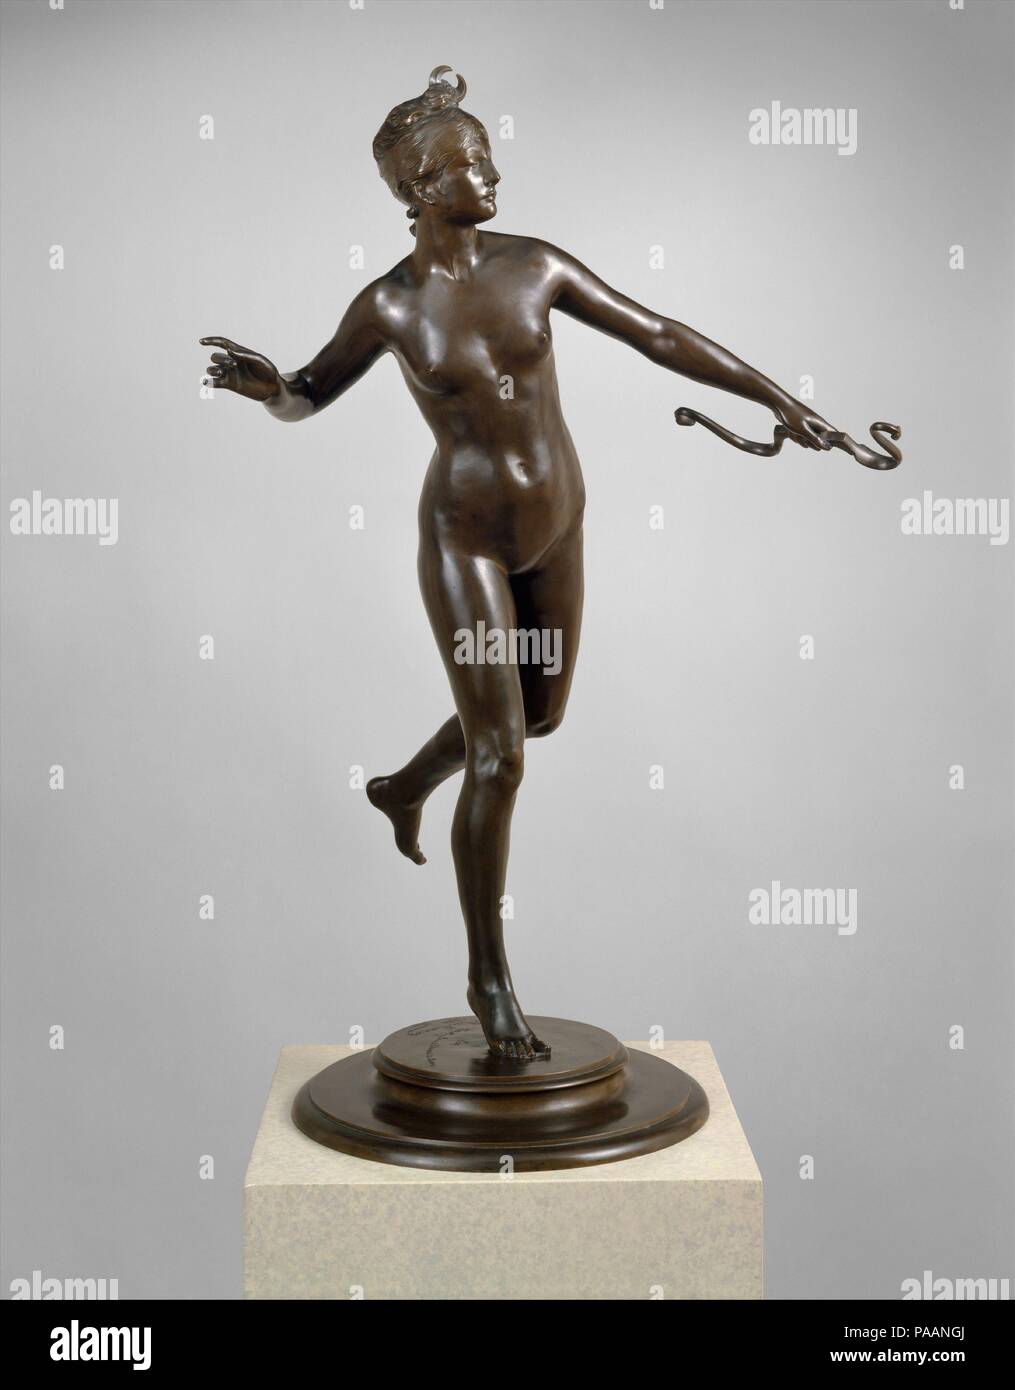 Diana. Artist: Frederick William MacMonnies (American, New York 1863-1937 New York). Dimensions: 30 3/4 x 12 1/4 x 12 1/4 in. (78.1 x 31.1 x 31.1 cm). Date: 1888-89; cast 1890.  While a student at the École des Beaux-Arts in Paris, MacMonnies began modeling his first statue, 'Diana'. After earning an honorable mention for a life-size plaster cast of it at the Salon of 1889, MacMonnies cast Diana as a bronze statuette the following year. Here, the Roman goddess is represented as a huntress wearing a crescent-moon hairpiece. She balances athletically on one foot, having just released an arrow fr Stock Photo